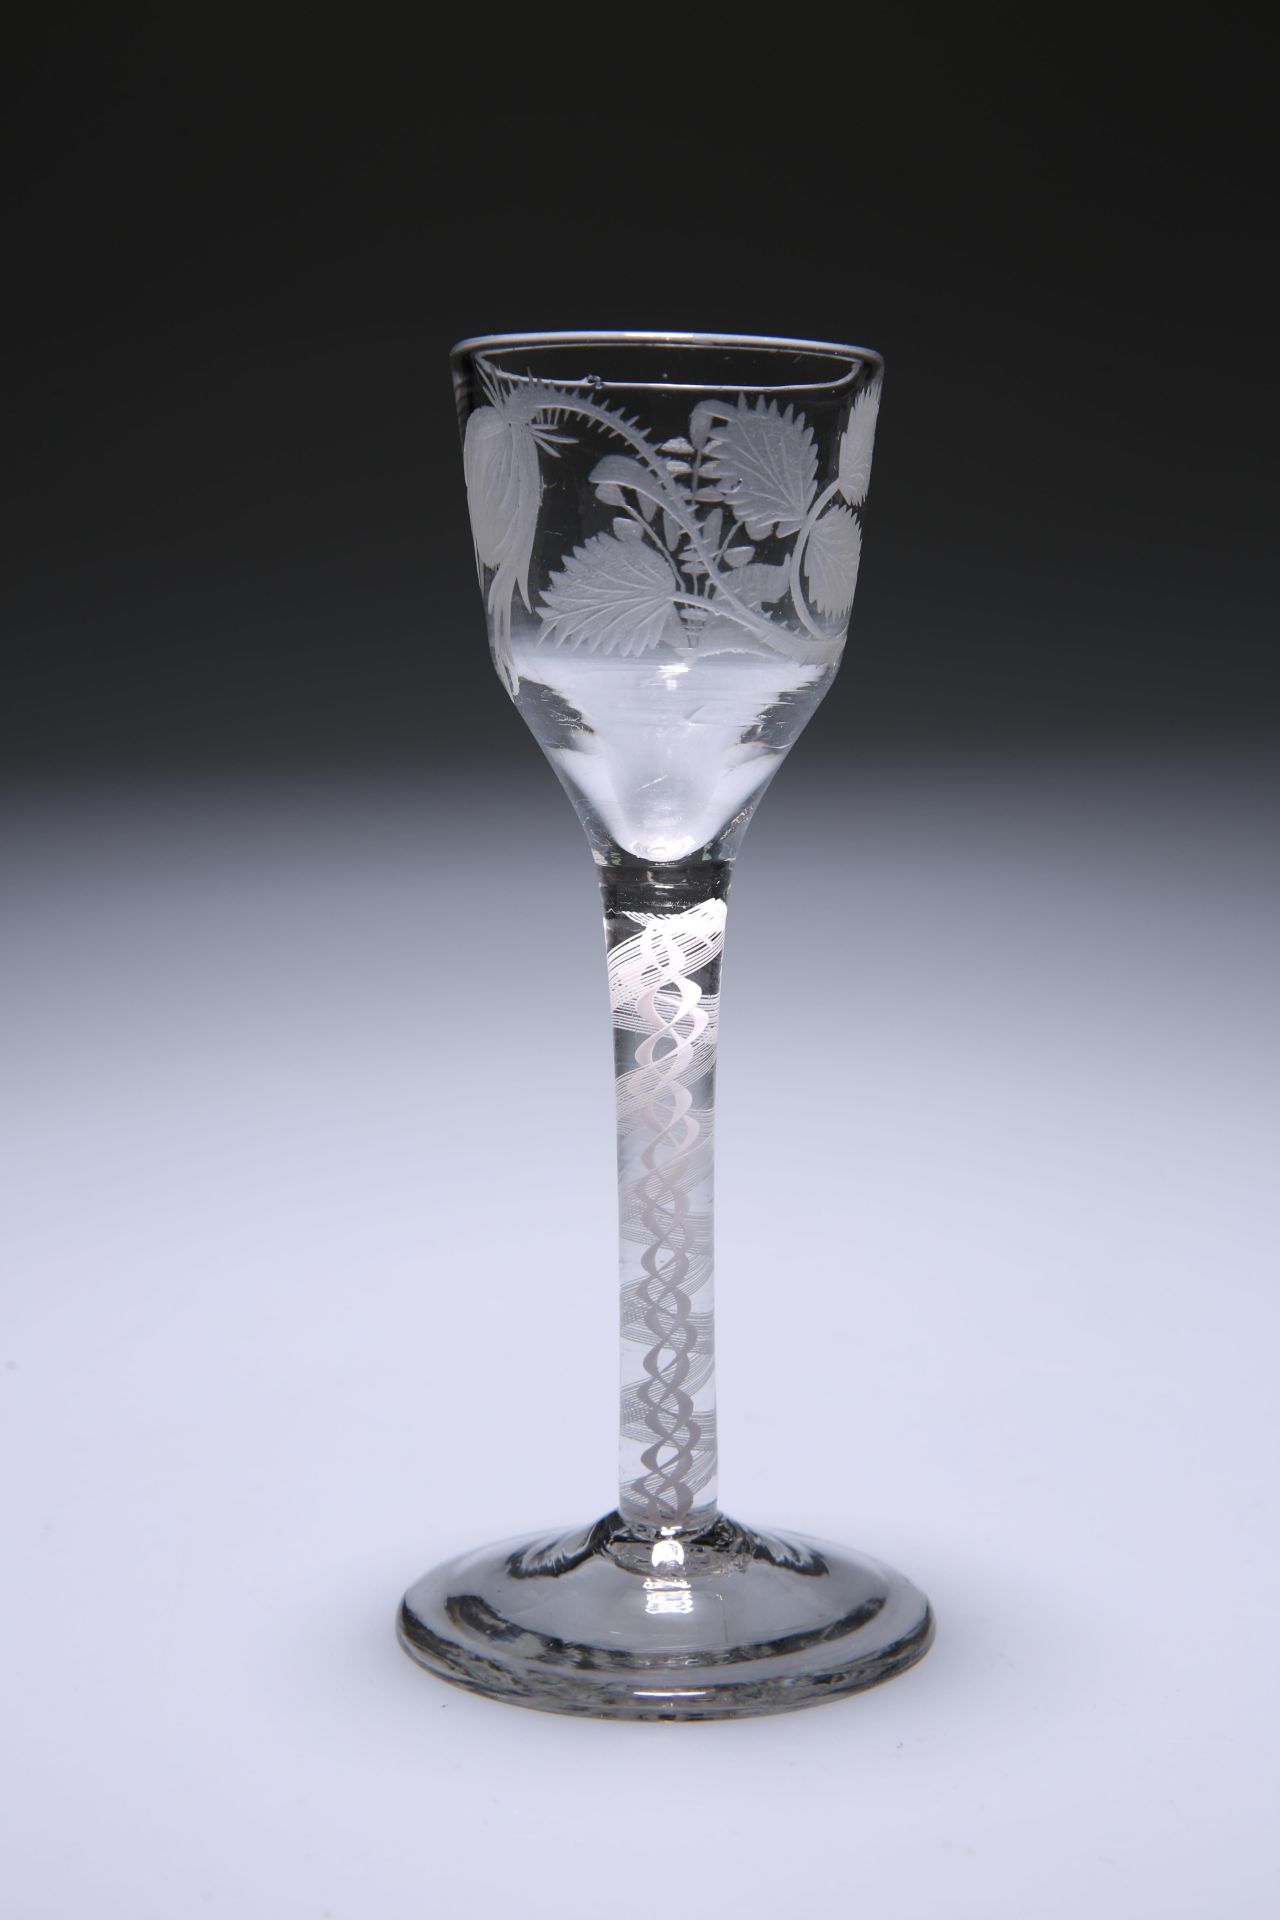 AN ENGRAVED OPAQUE TWIST WINE GLASS OF JACOBITE INTEREST